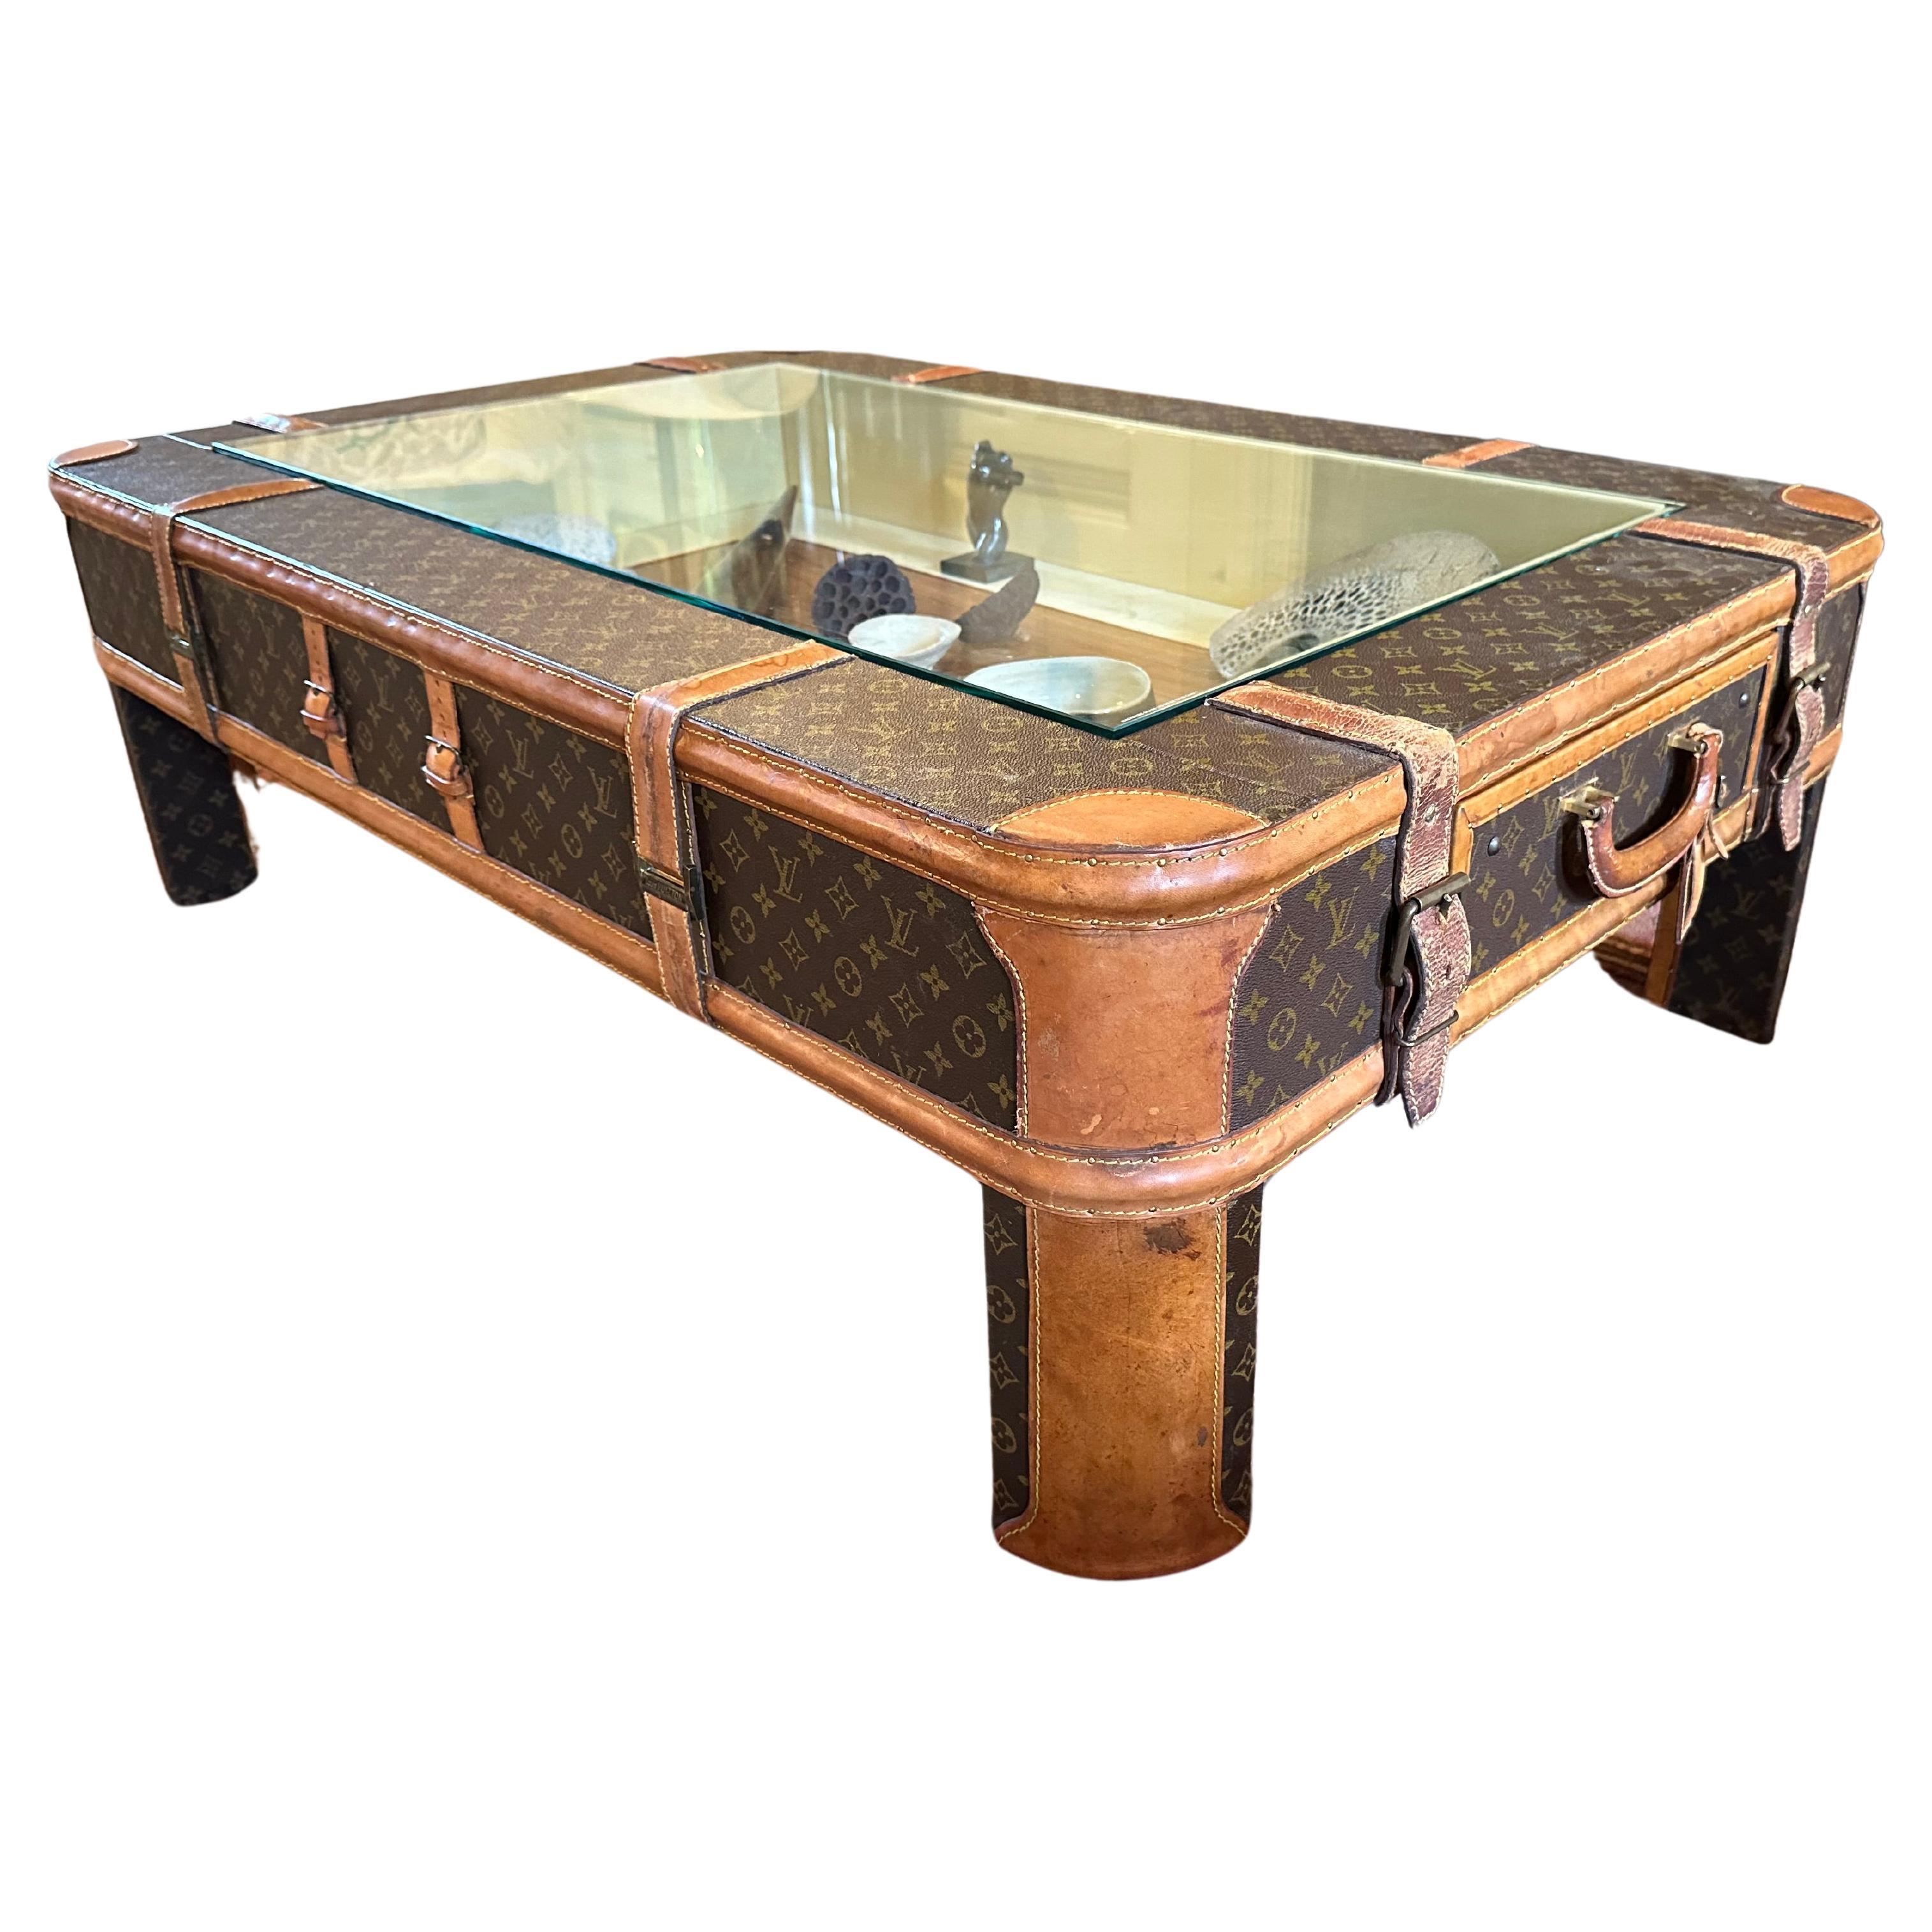 A coffee table made from vintage Louis Vuitton luggage For Sale